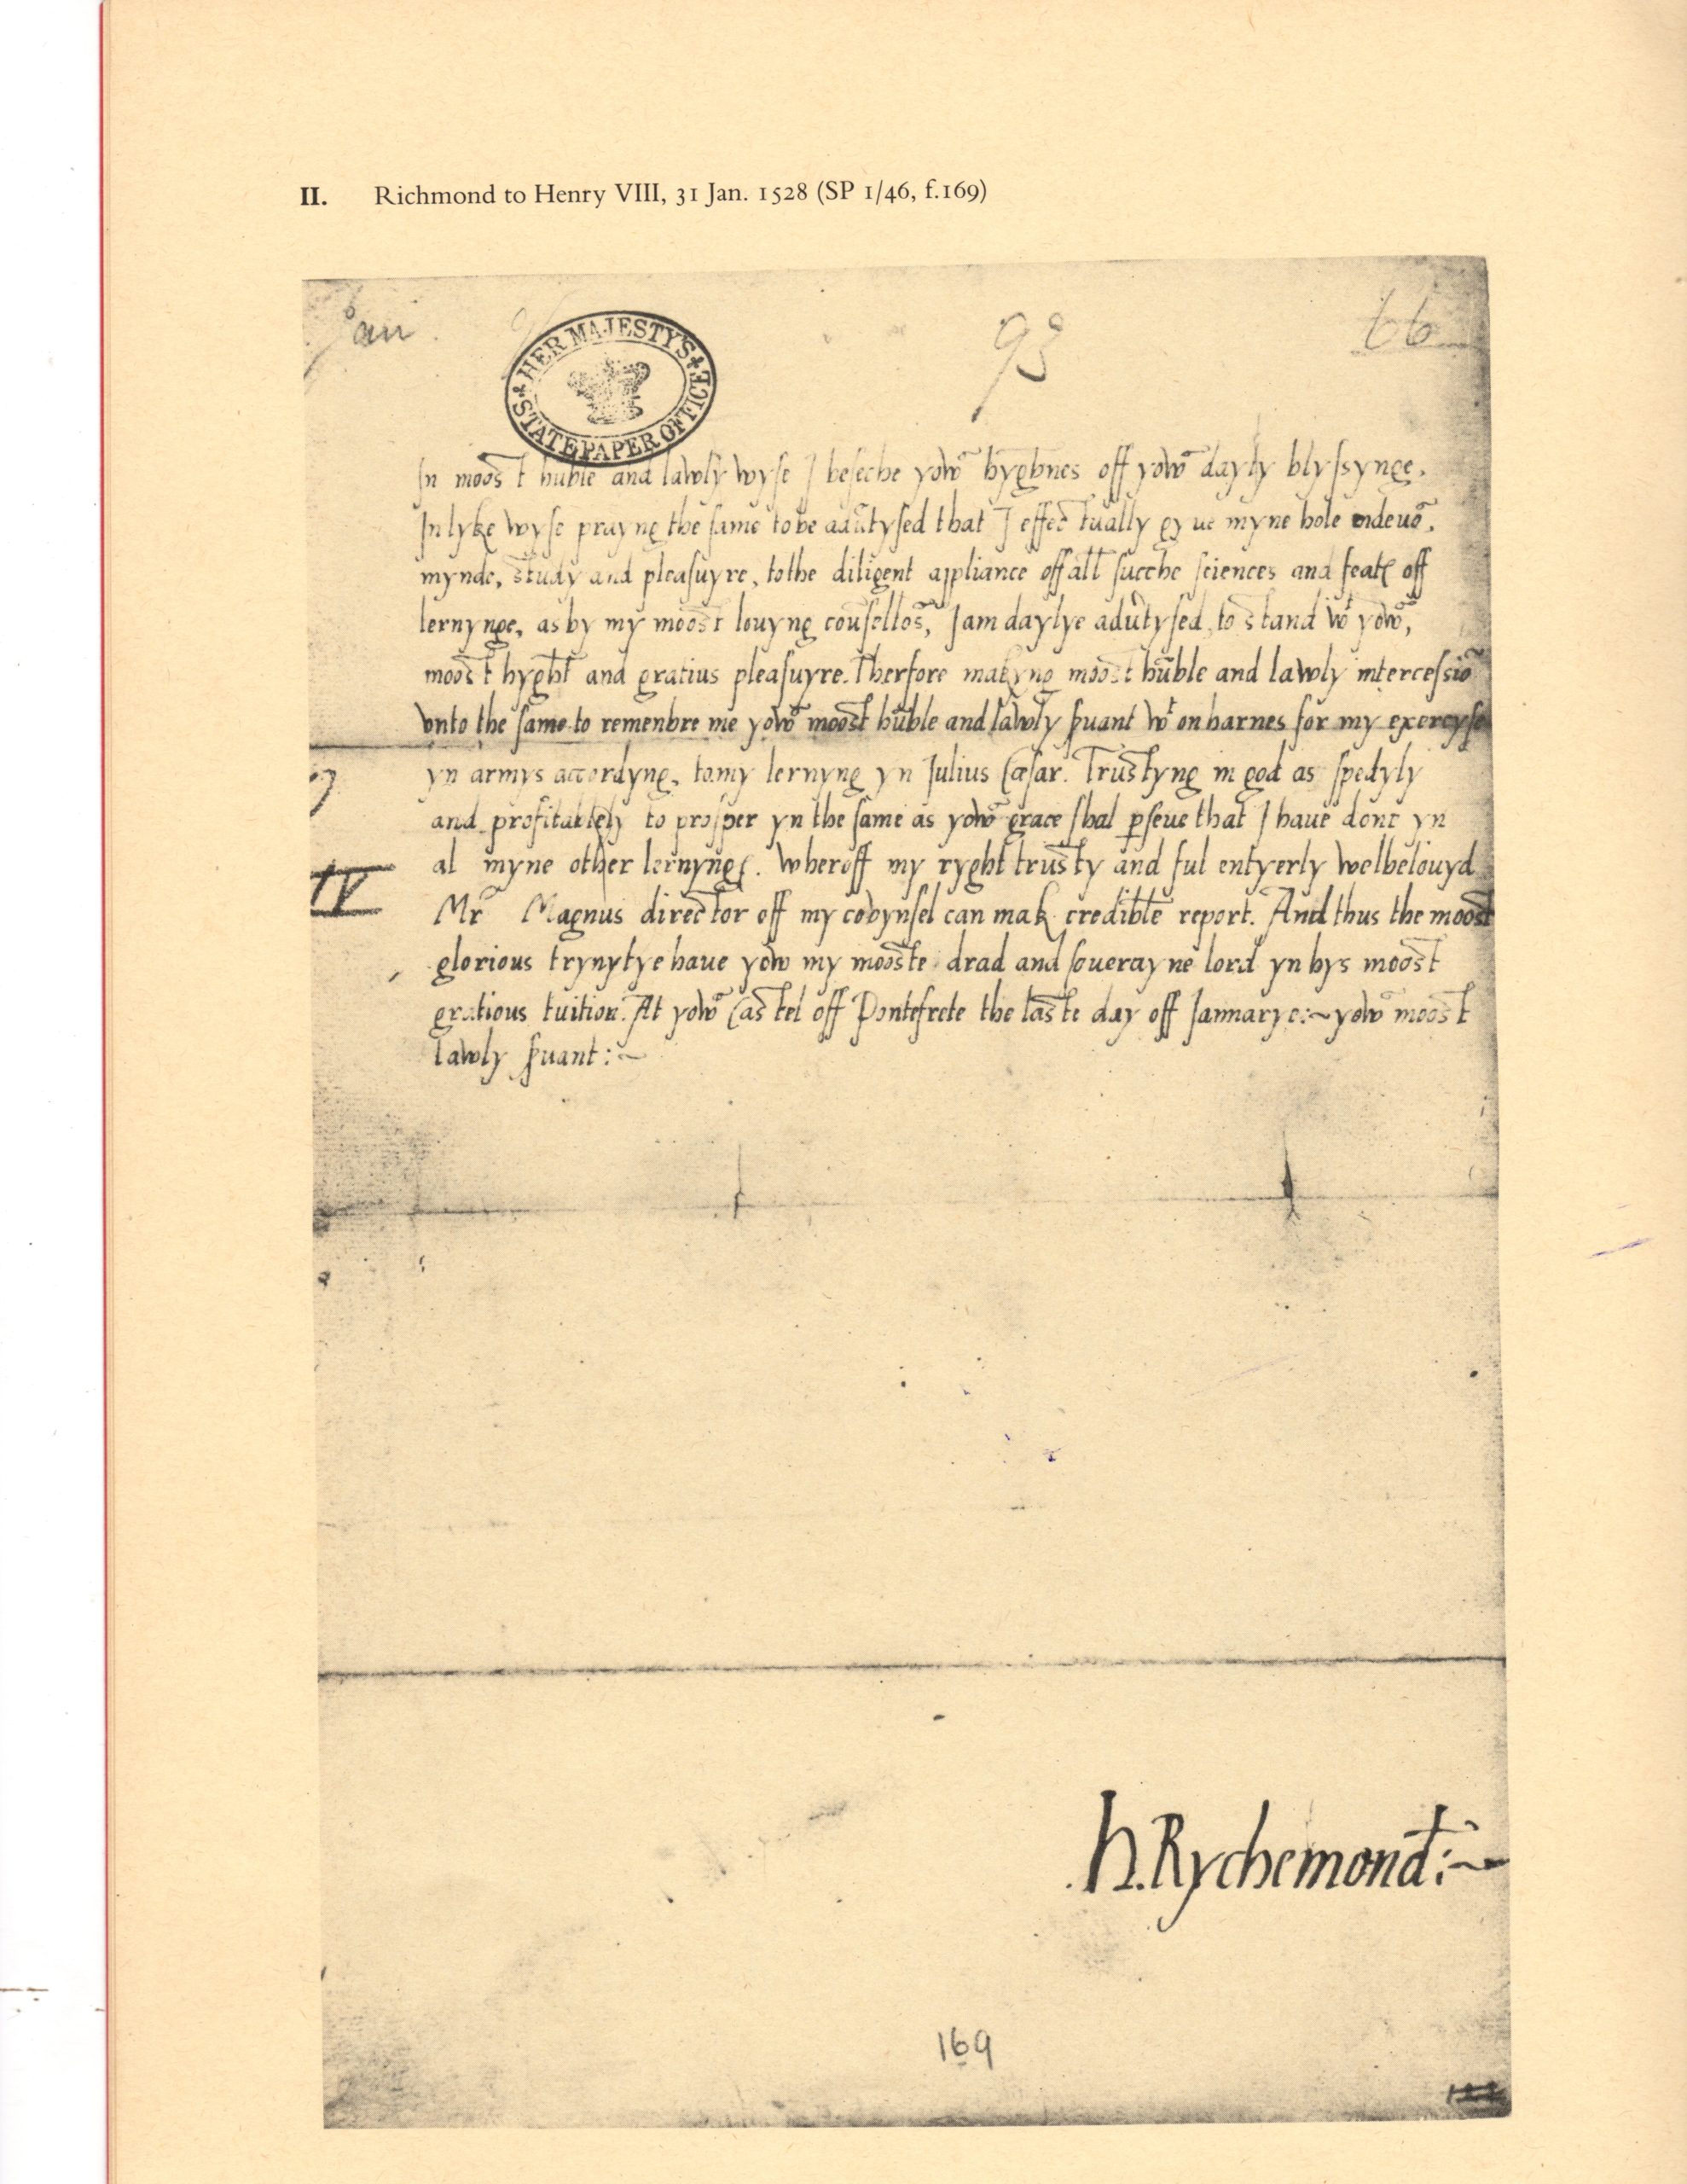 January 31, 1528 - A Request From an Older Henry FitzRoy